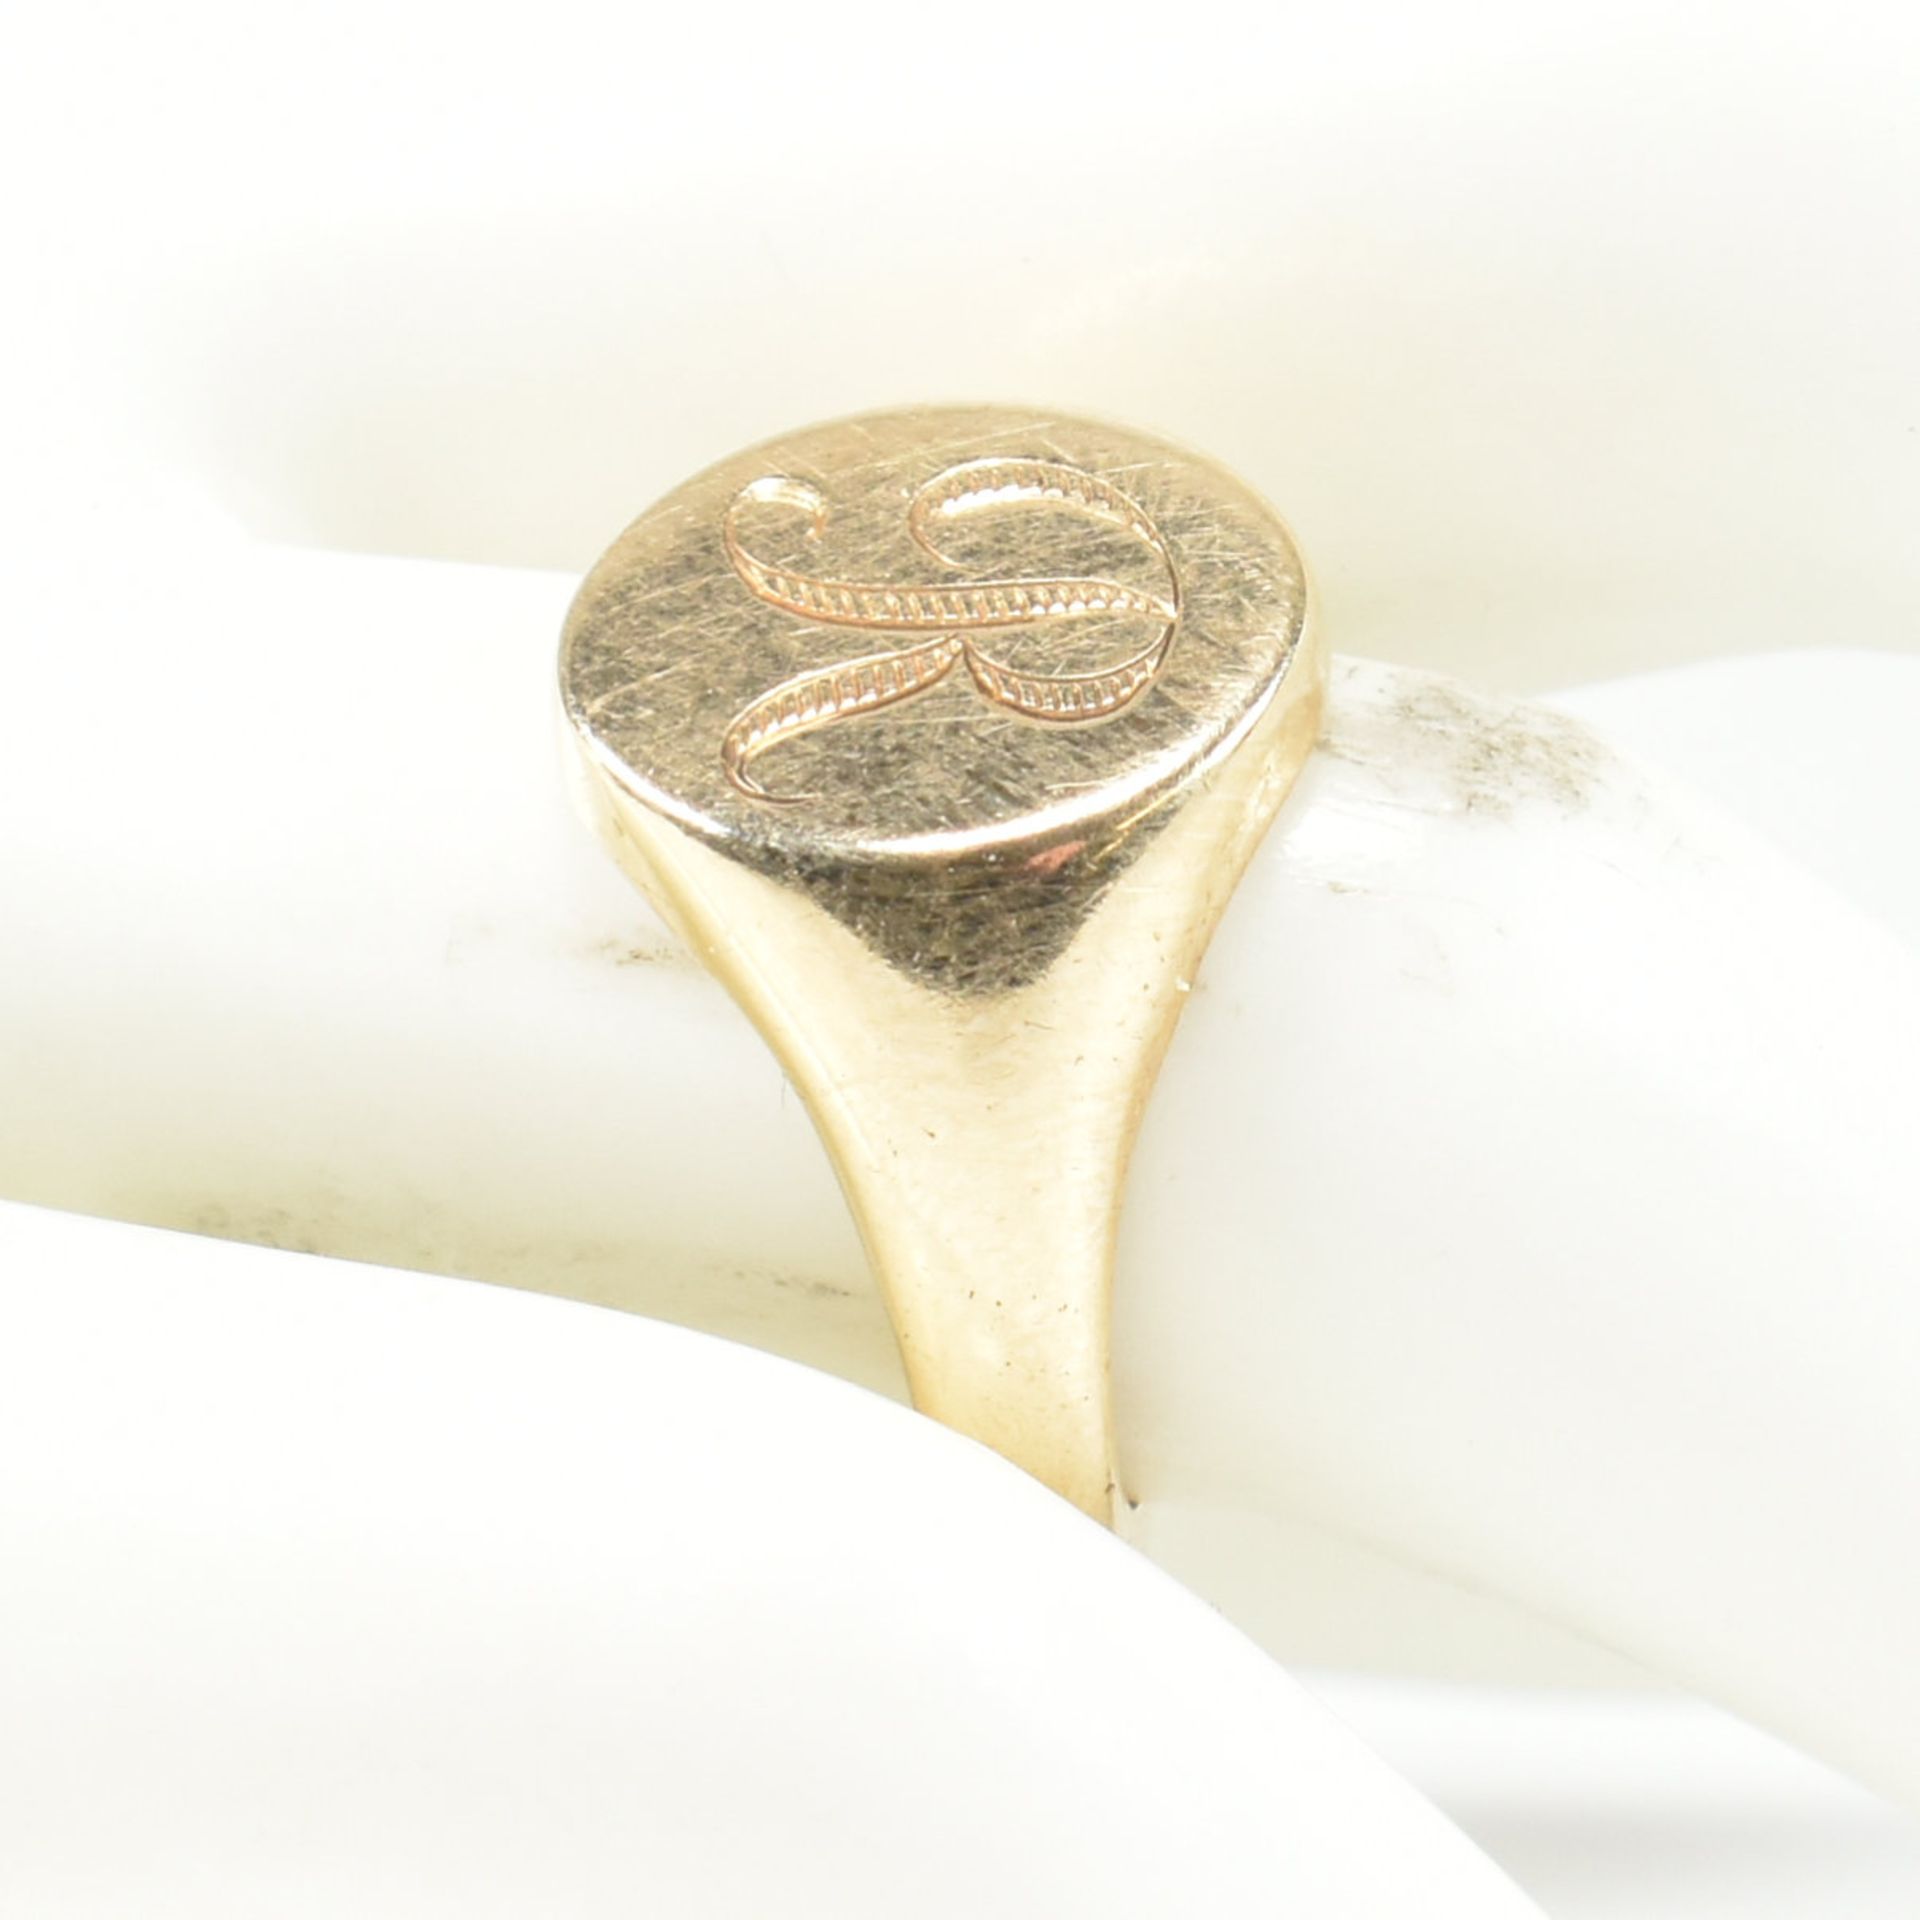 9CT GOLD SIGNET RING WITH INITIAL MONOGRAM - Image 6 of 6